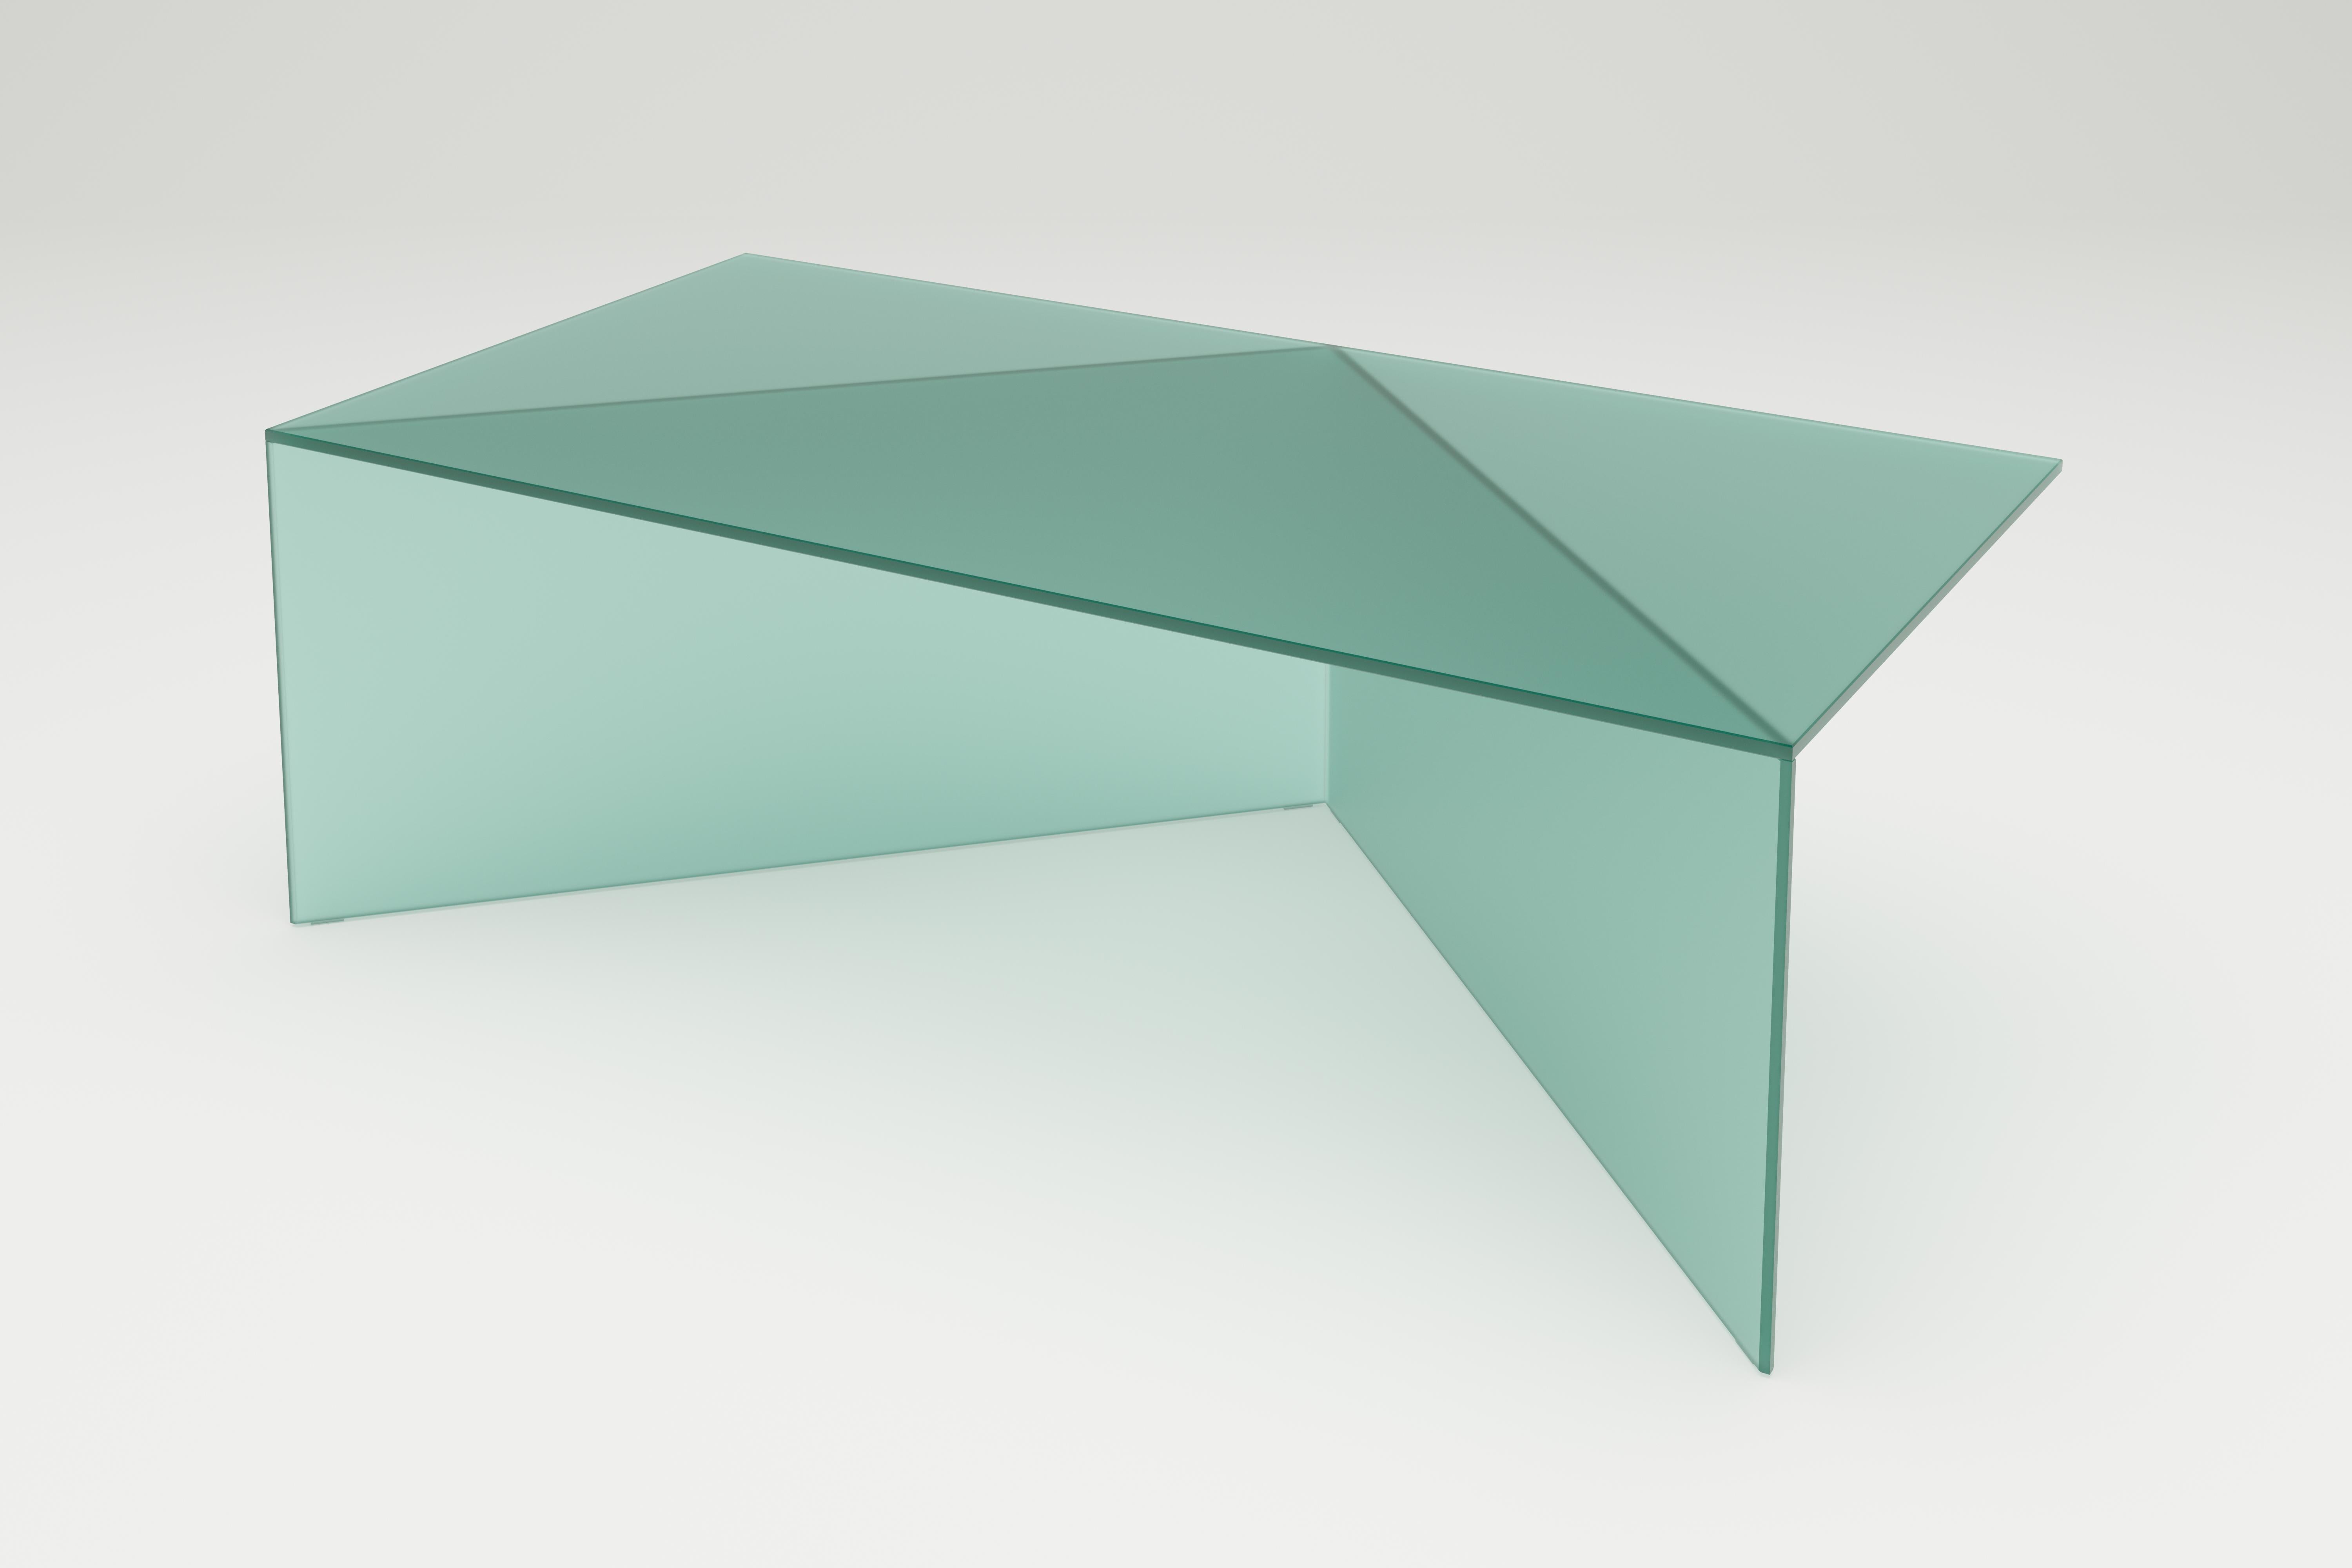 Green Satin glass poly oblong coffe table by Sebastian Scherer
Dimensions: D120 x W30 x H40 cm
Materials: Solid coloured glass.
Weight: 34.4 kg.
Also Available: Colours:Clear white (transparent) / clear green / clear blue / clear bronze / clear